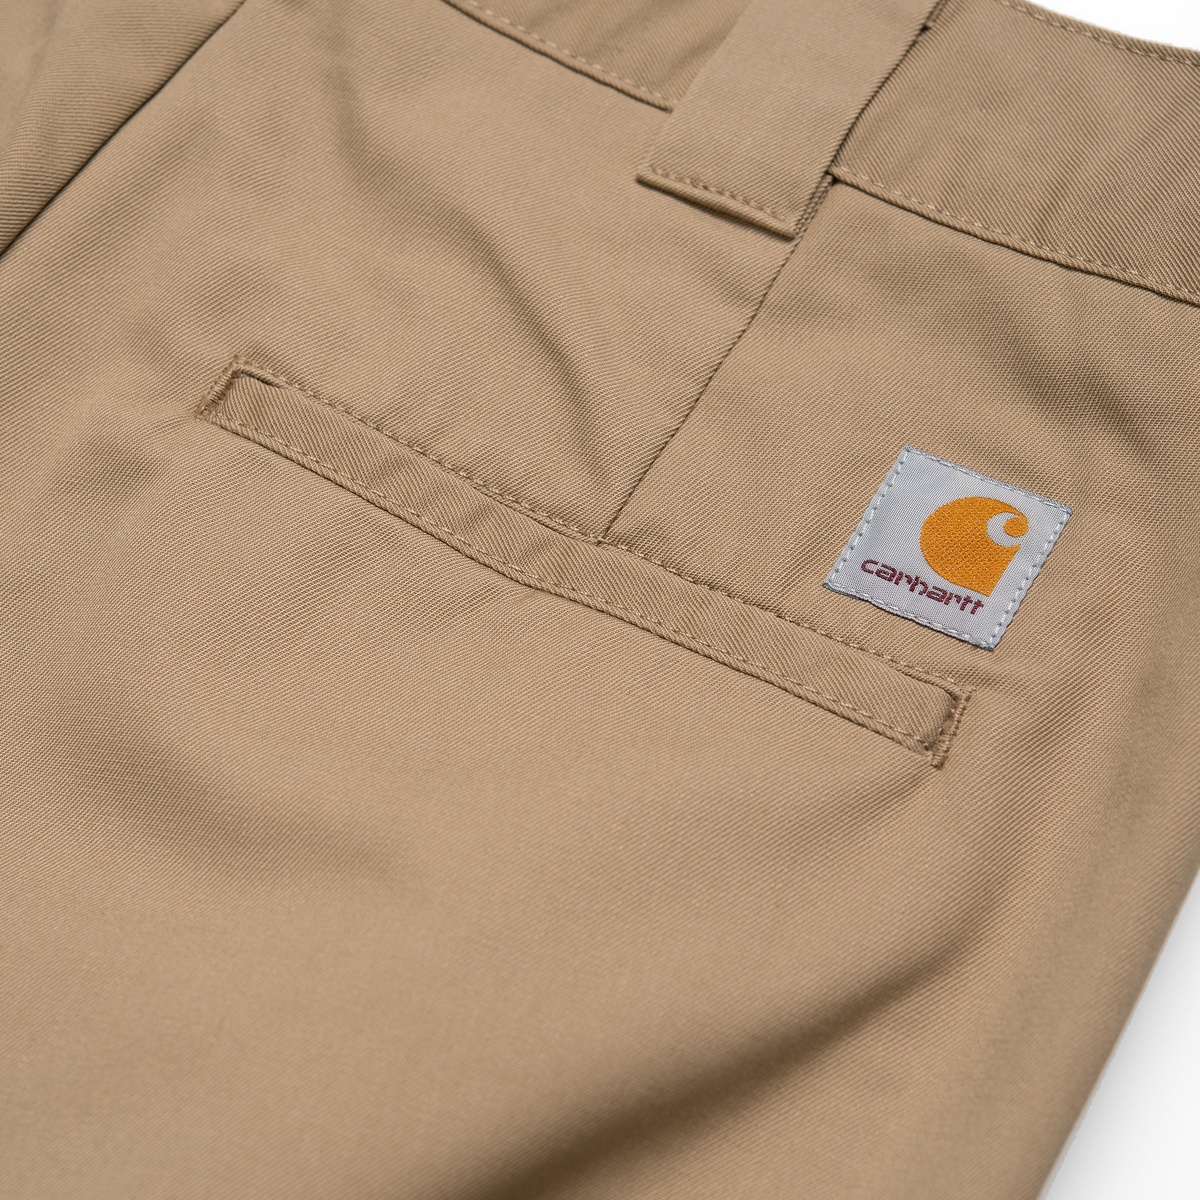 Carhartt WIP Craft Pant Leather Rinsed